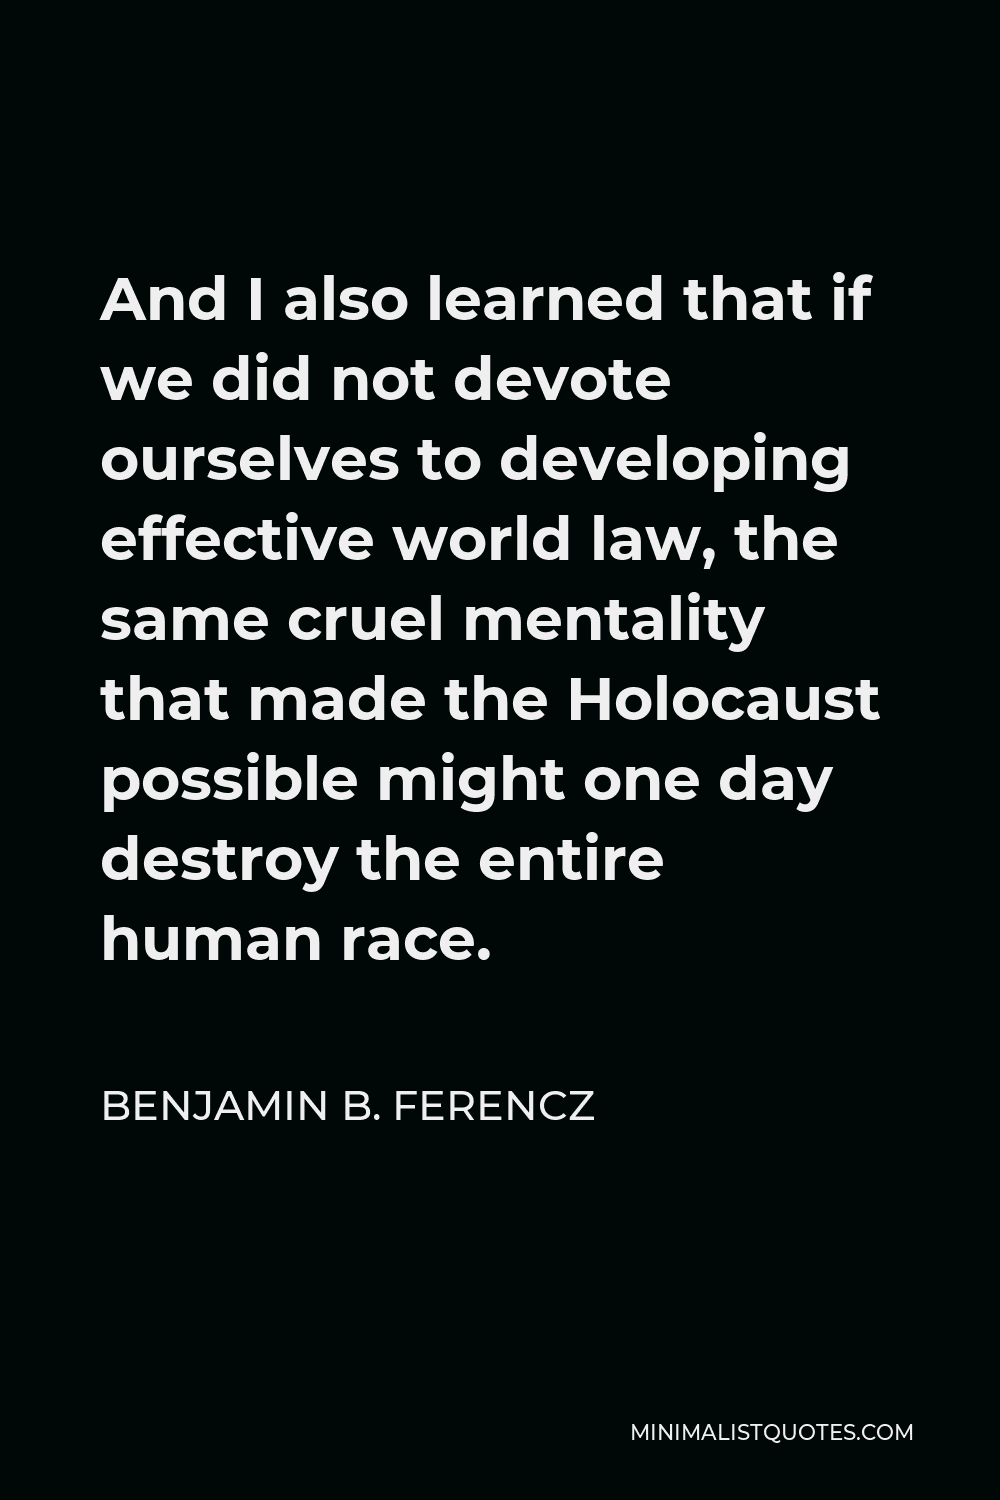 Benjamin B. Ferencz Quote - And I also learned that if we did not devote ourselves to developing effective world law, the same cruel mentality that made the Holocaust possible might one day destroy the entire human race.